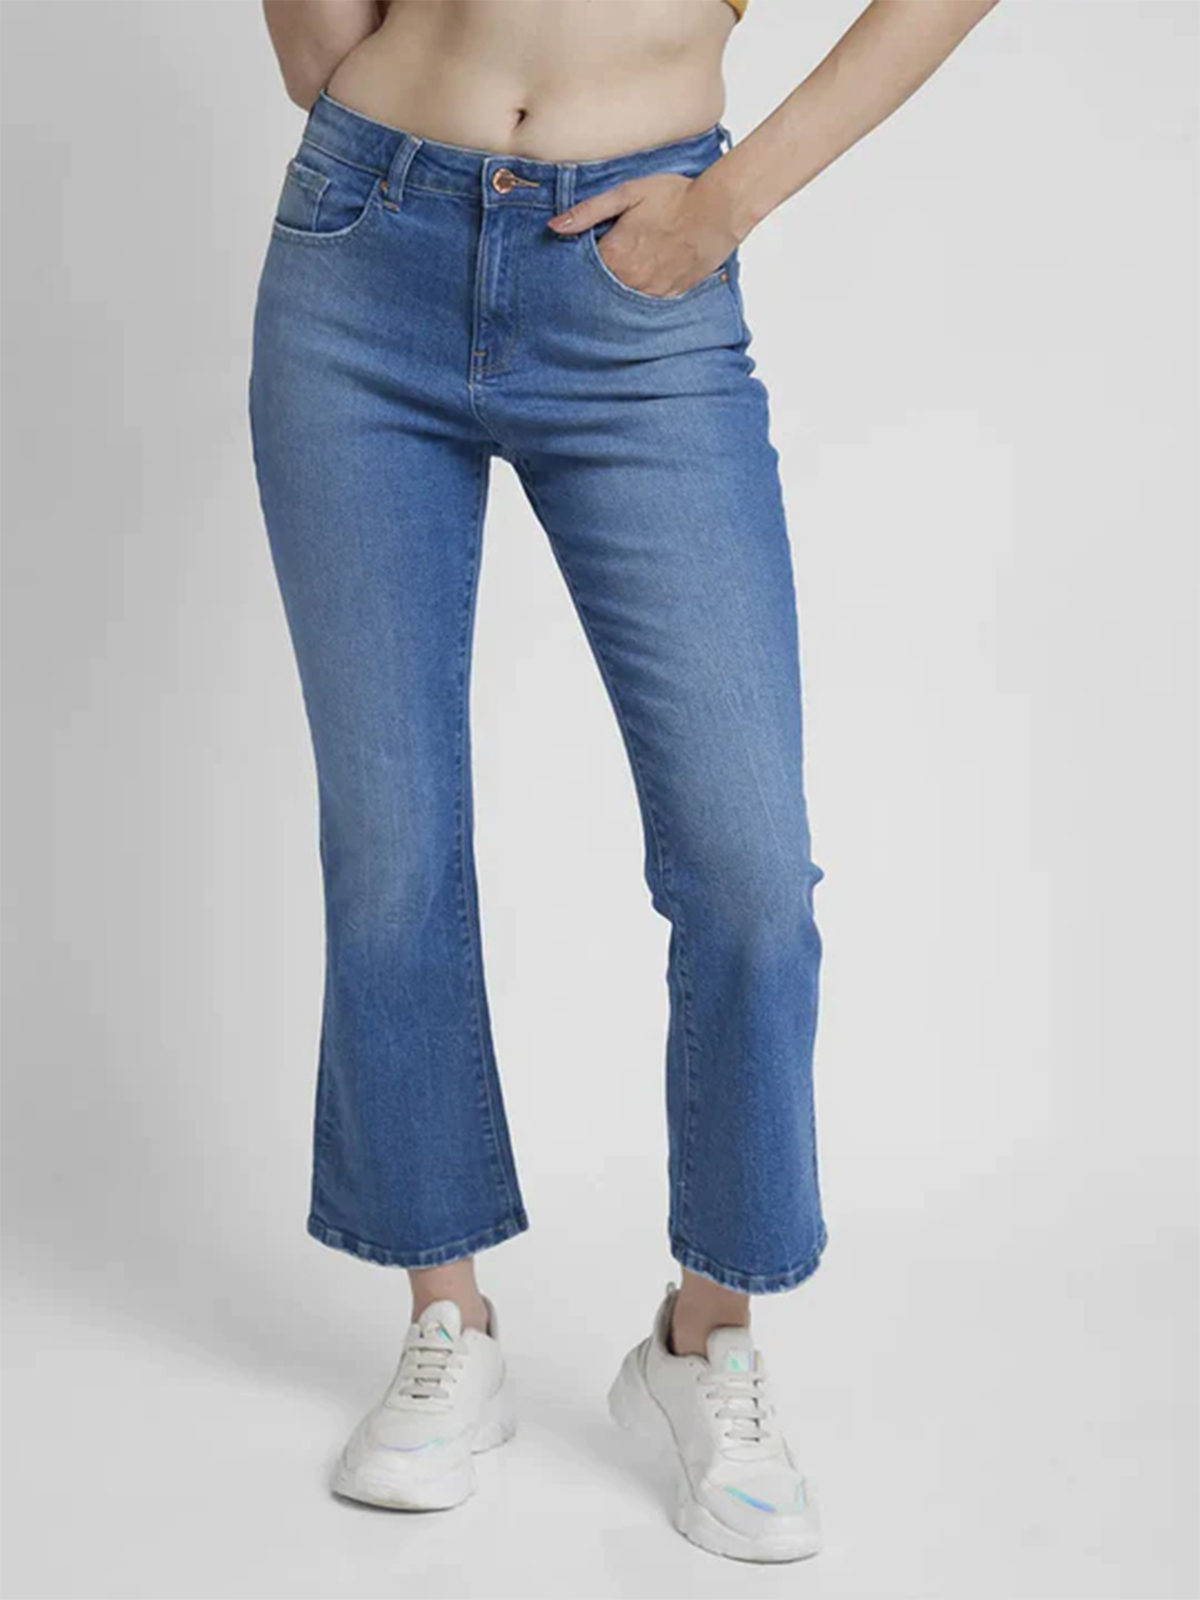 Ladies high waist Boot cut ankle length jeans